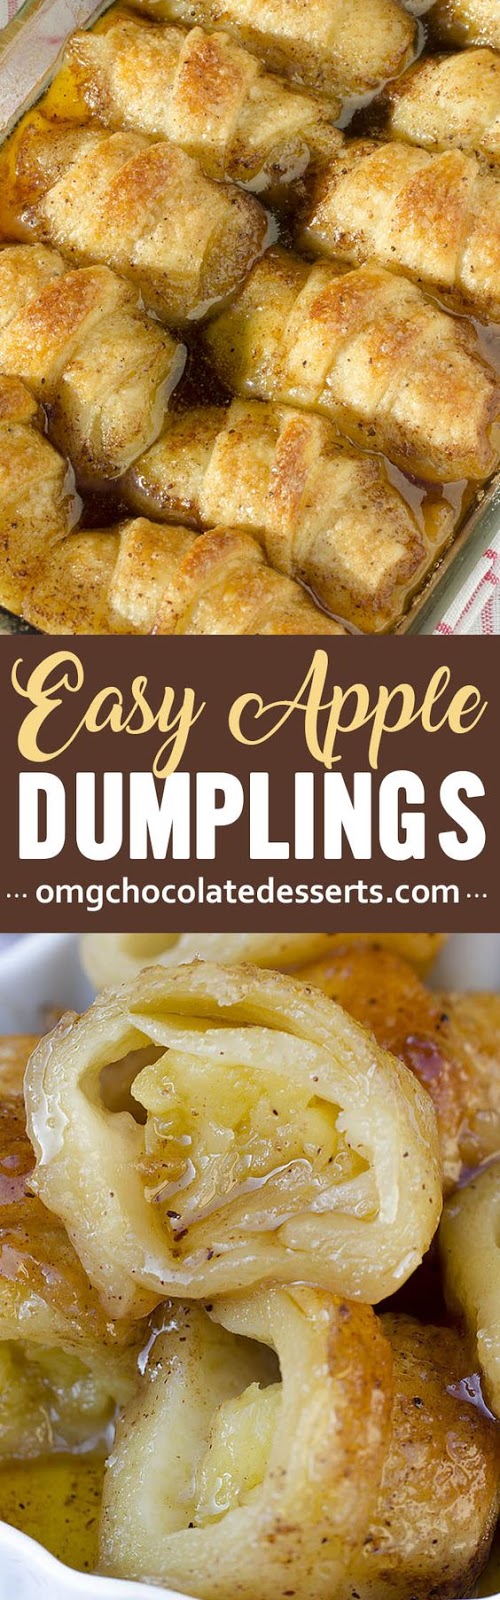 These Easy Country Apple Dumplings are soft and gooey on the bottom, but crispy on top, and they taste like apple pie. #applerecipes #apple #dumplings #southernfood #dessert